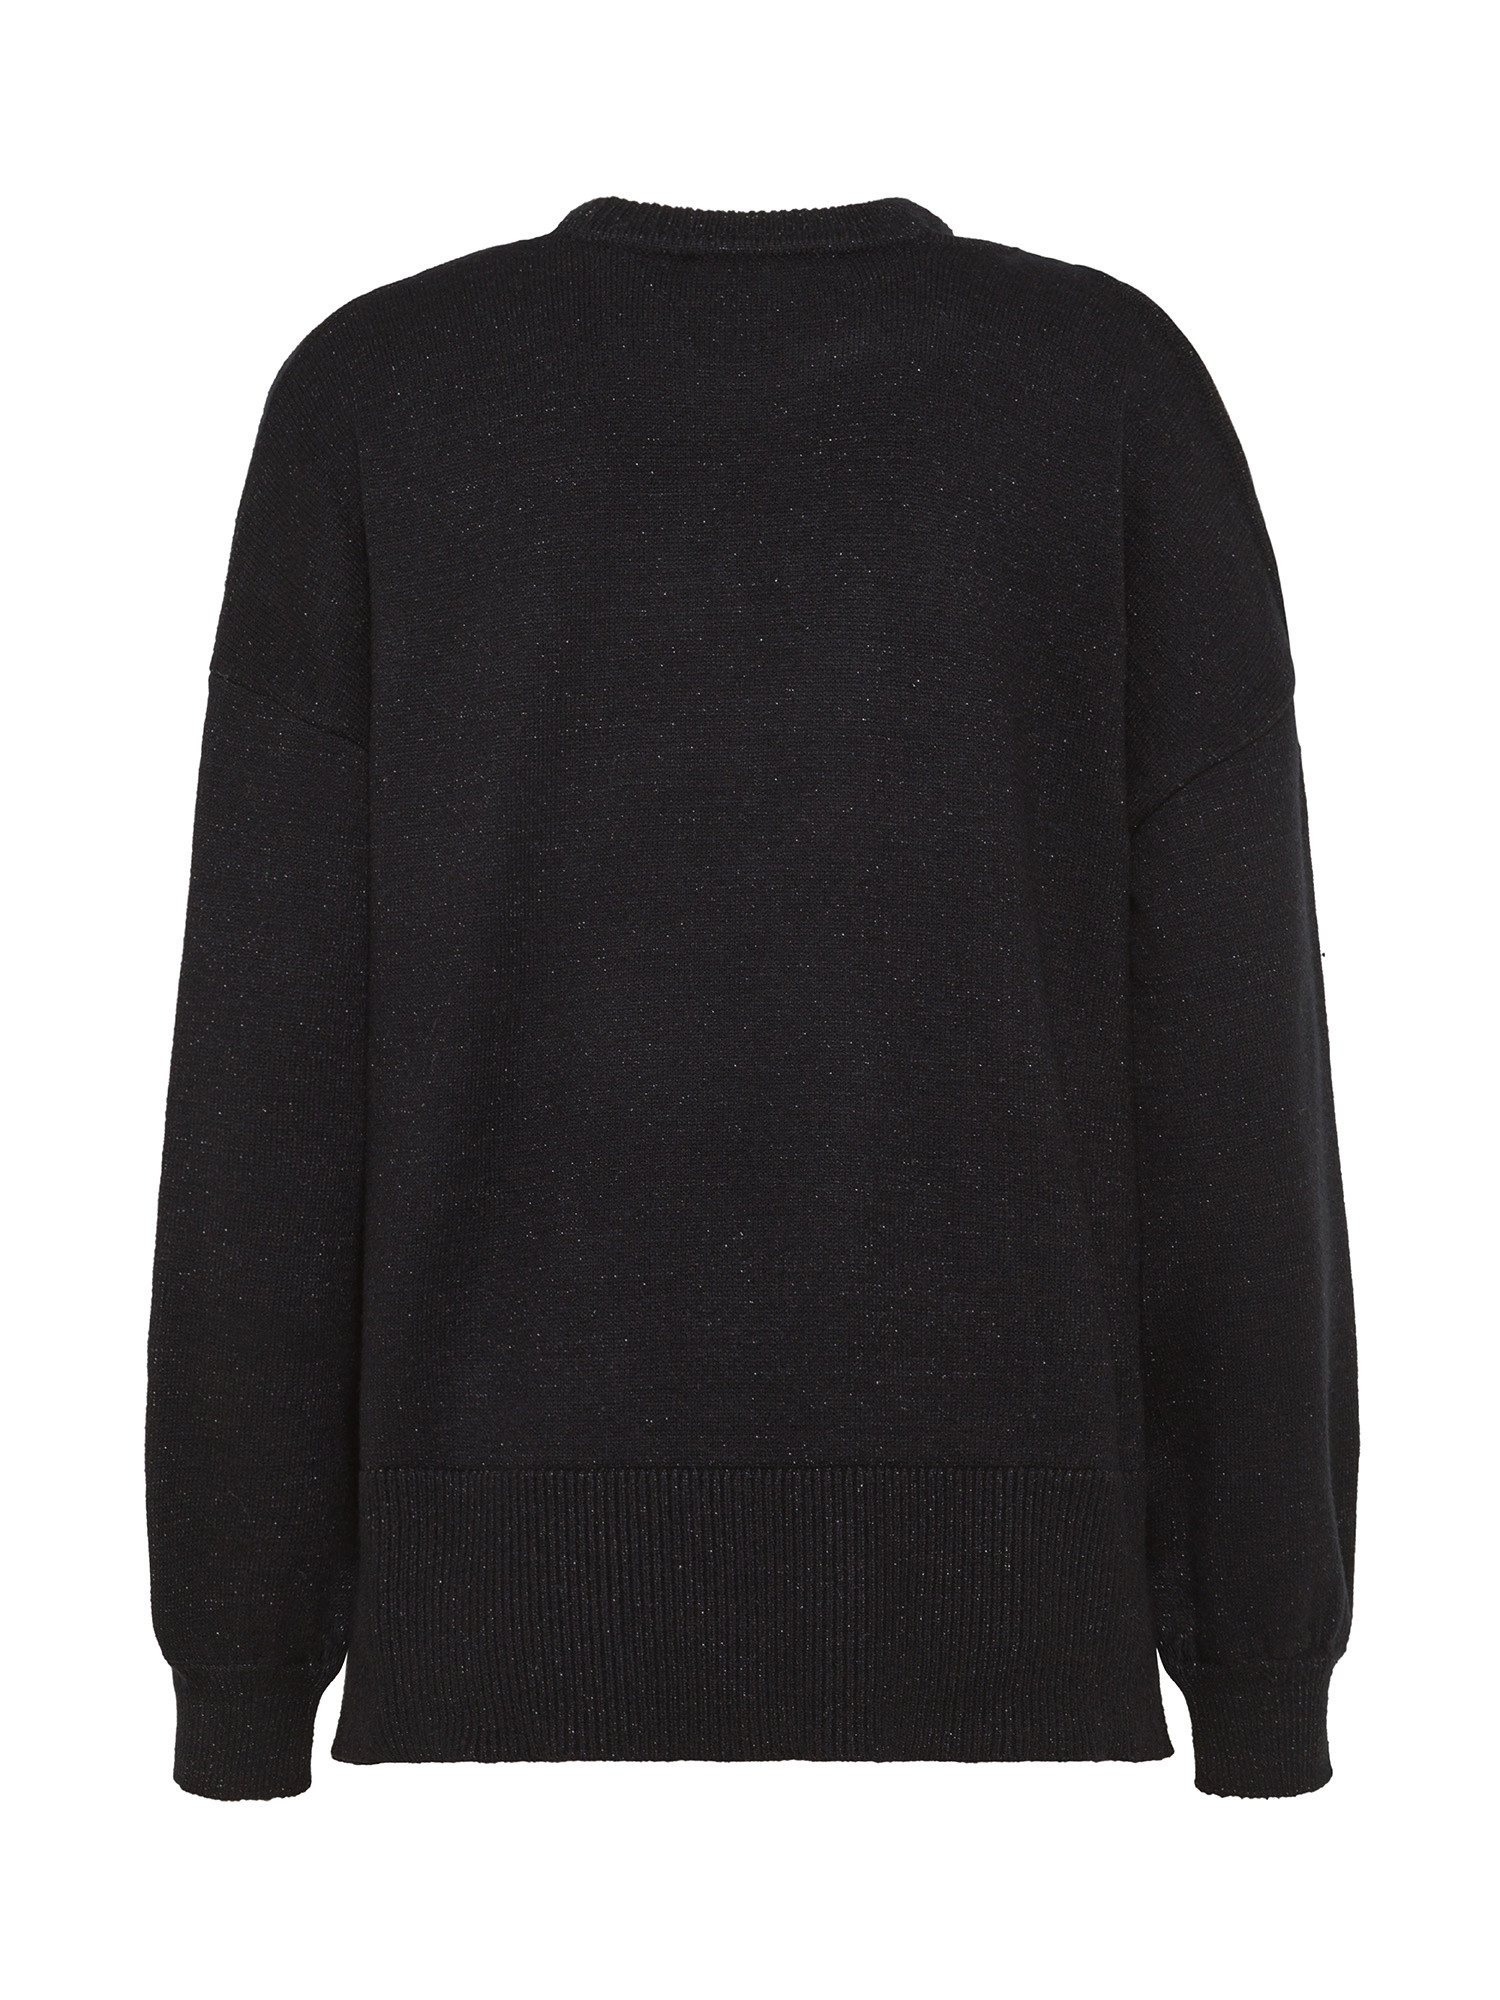 DKNY - Sweater with cut out details, Black, large image number 1